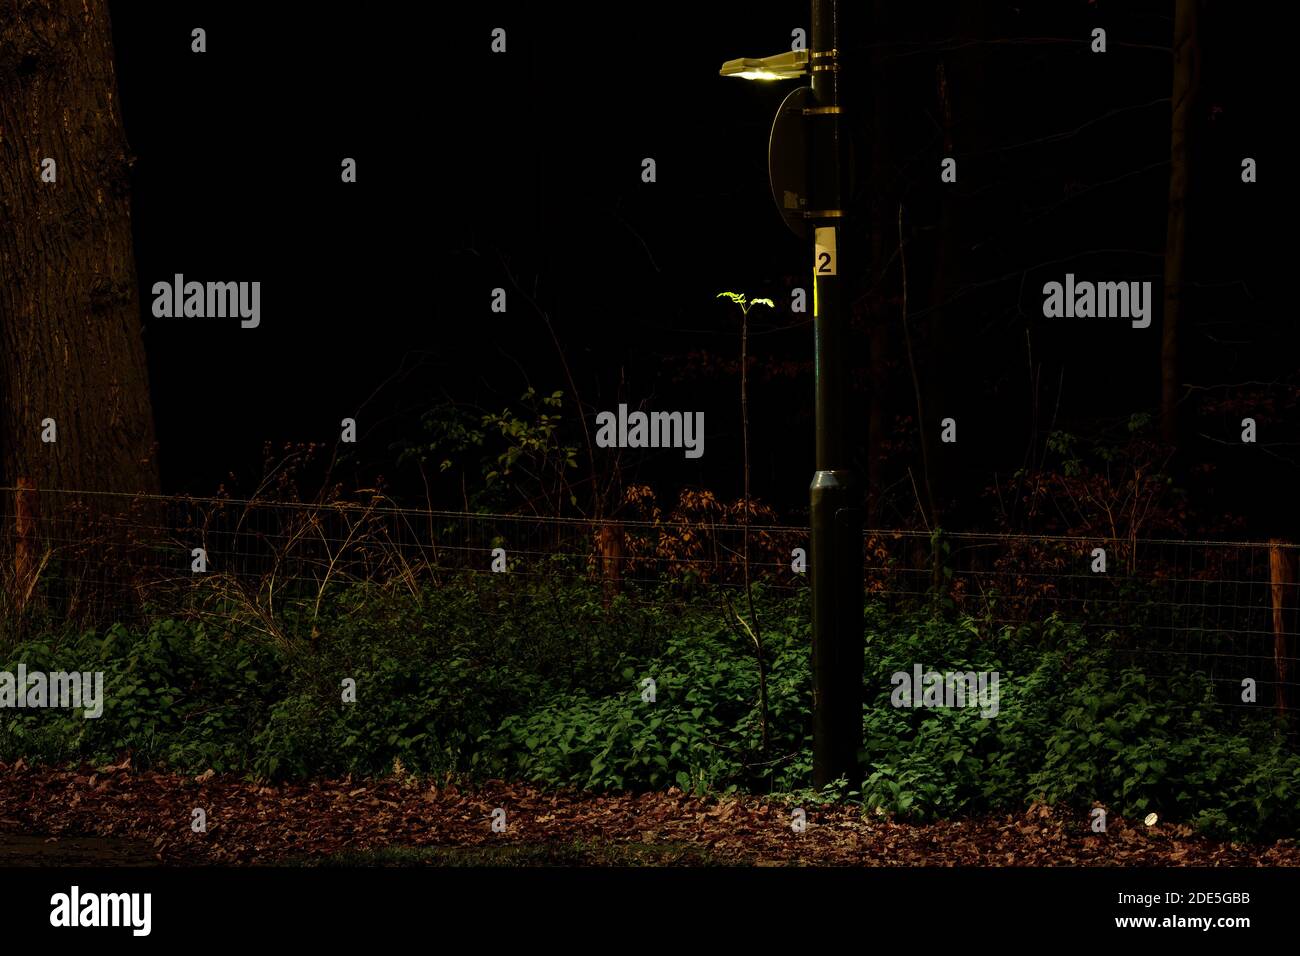 A young wild sapling growing tall under an illuminated road sign in autumn, with green leaves at the top. Stock Photo